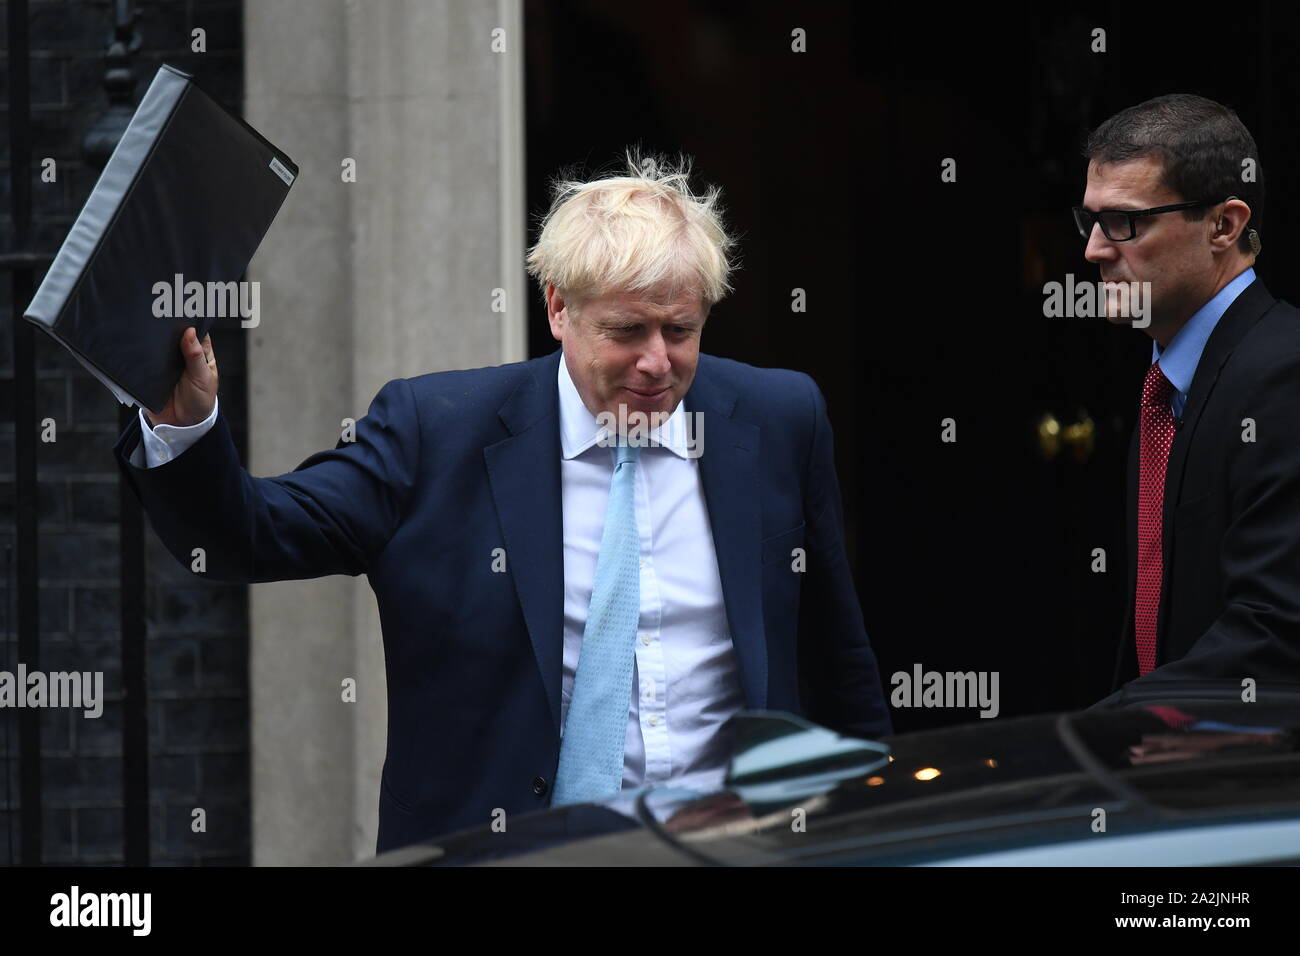 Prime Minister Boris Johnson leaves 10 Downing Street, London. PA Photo. Picture date: Thursday October 3, 2019. See PA story POLITICS Brexit. Photo credit should read: Victoria Jones/PA Wire Stock Photo